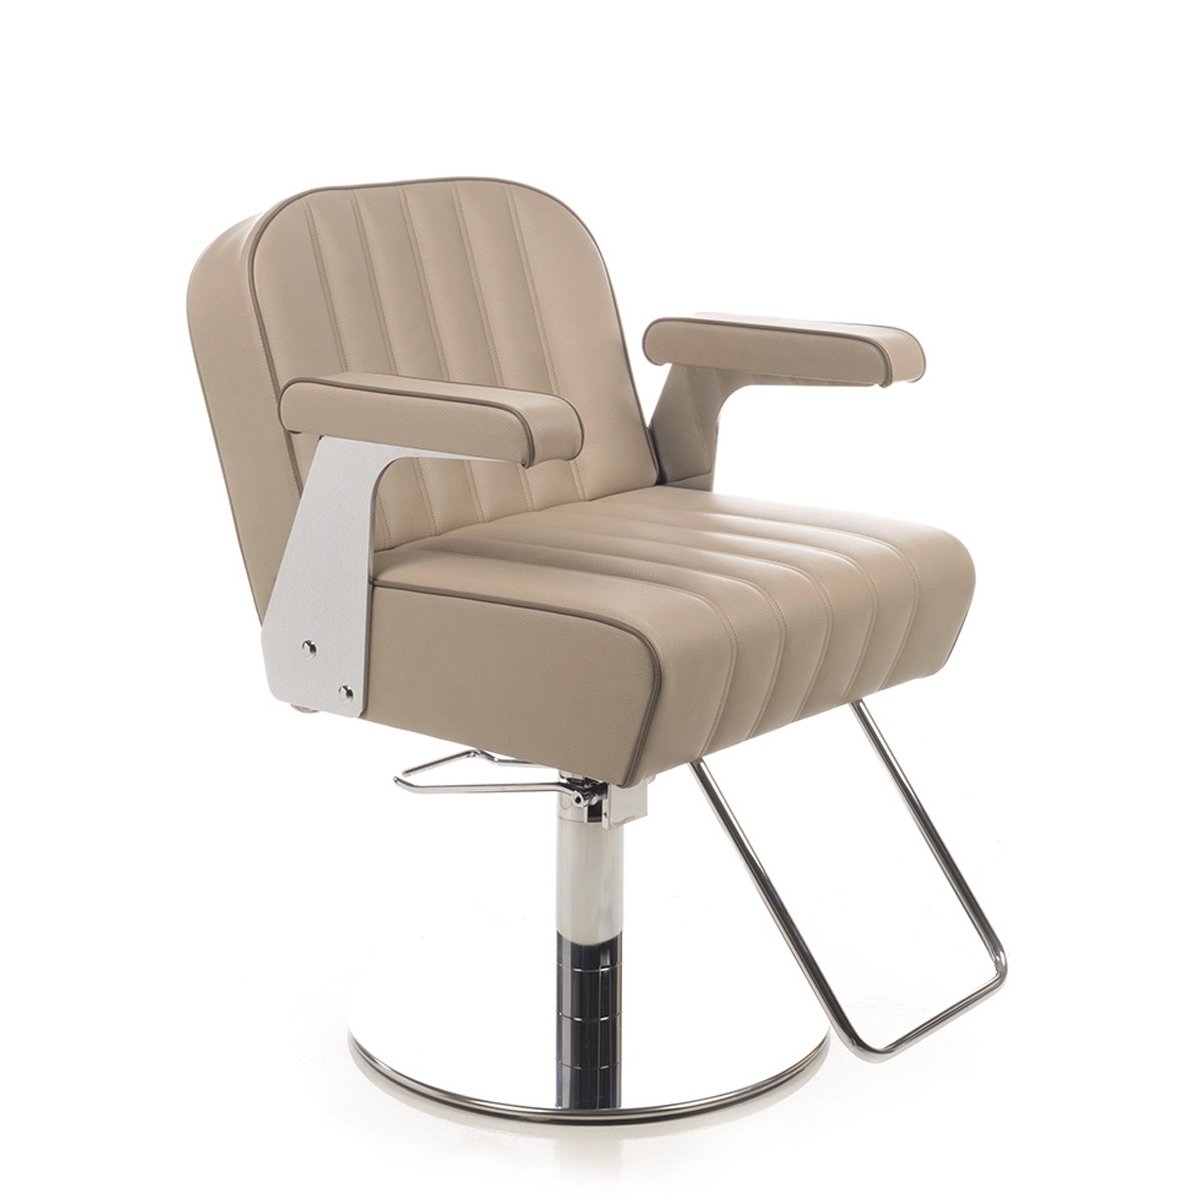 Peggy Sue Chair by Gamma & Bross Spa - GNB-GSPS005RA